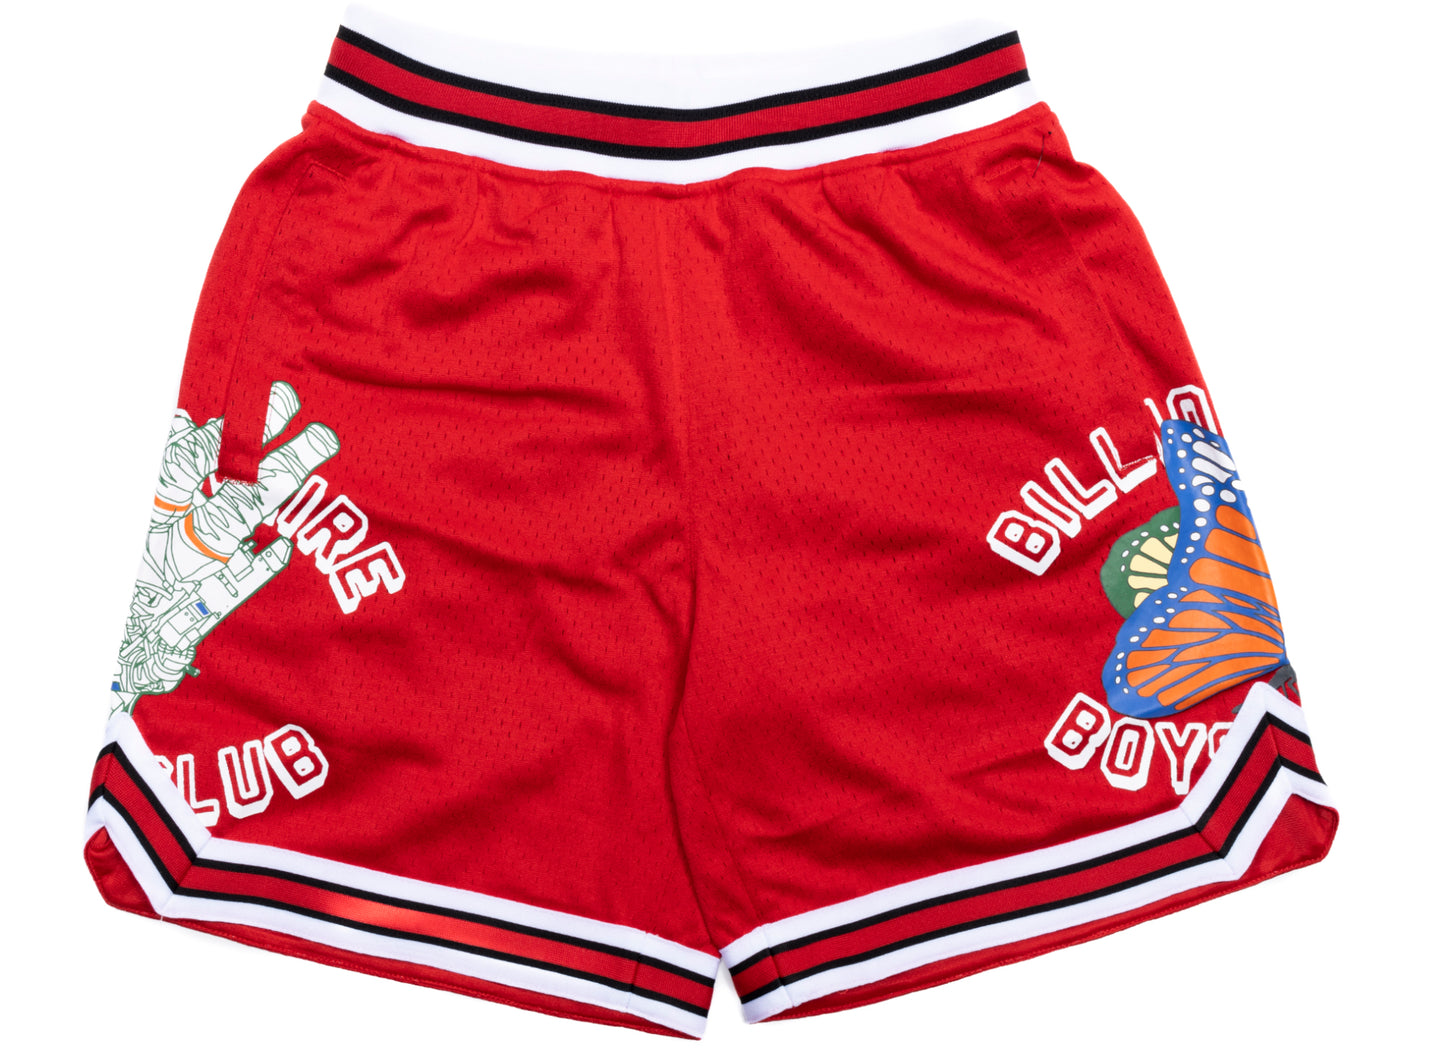 BBC Float Shorts in Red